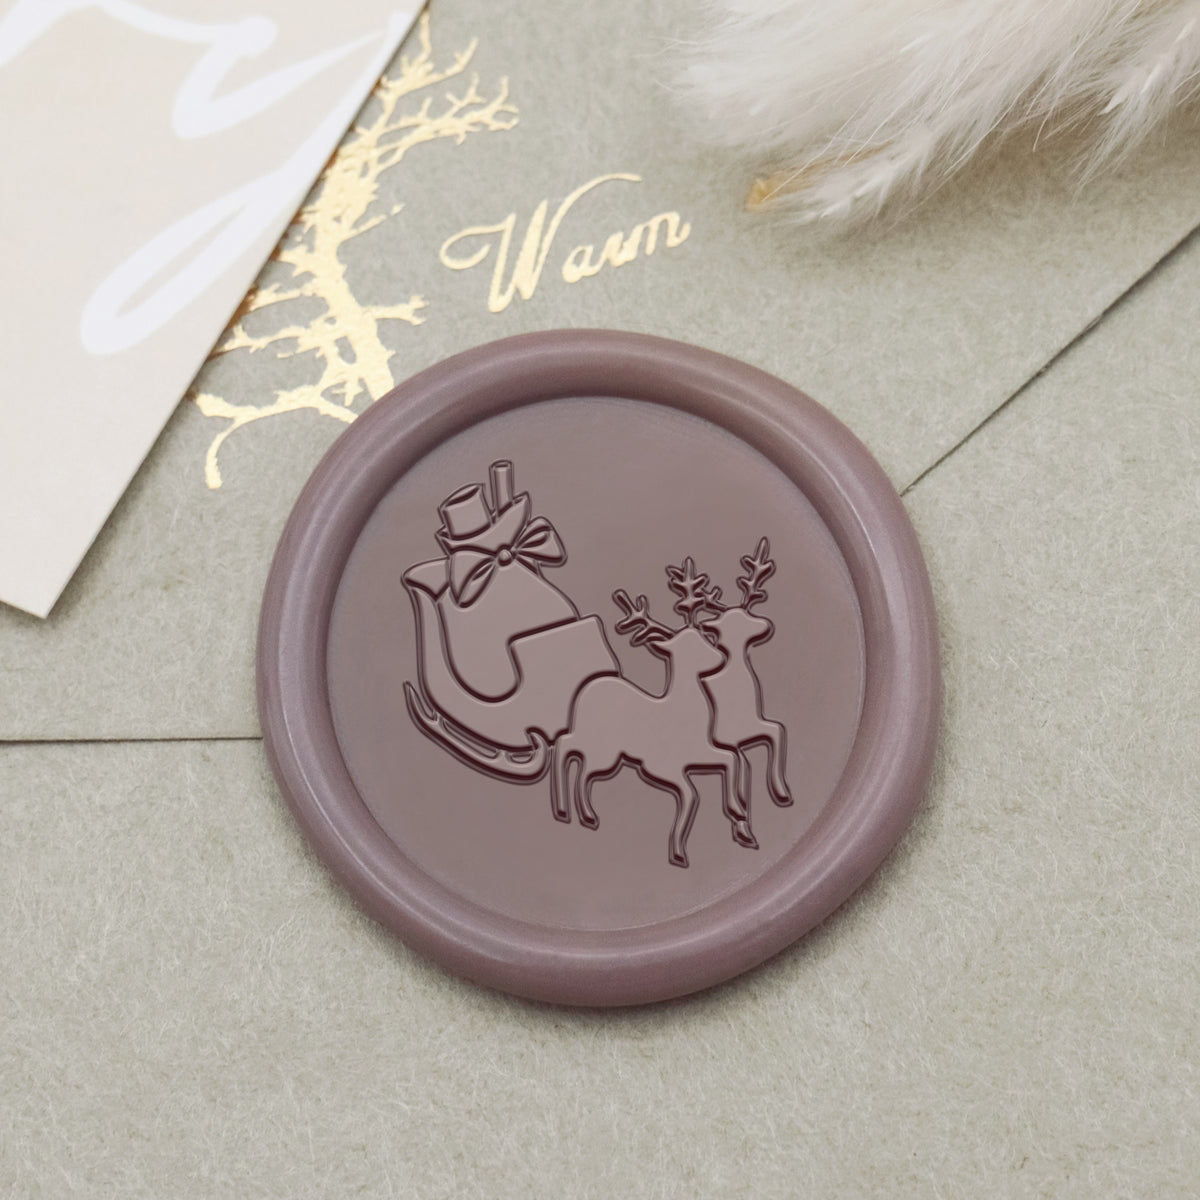 Reindeer-Drawn Sleigh with Gift Wax Seal Stamp1